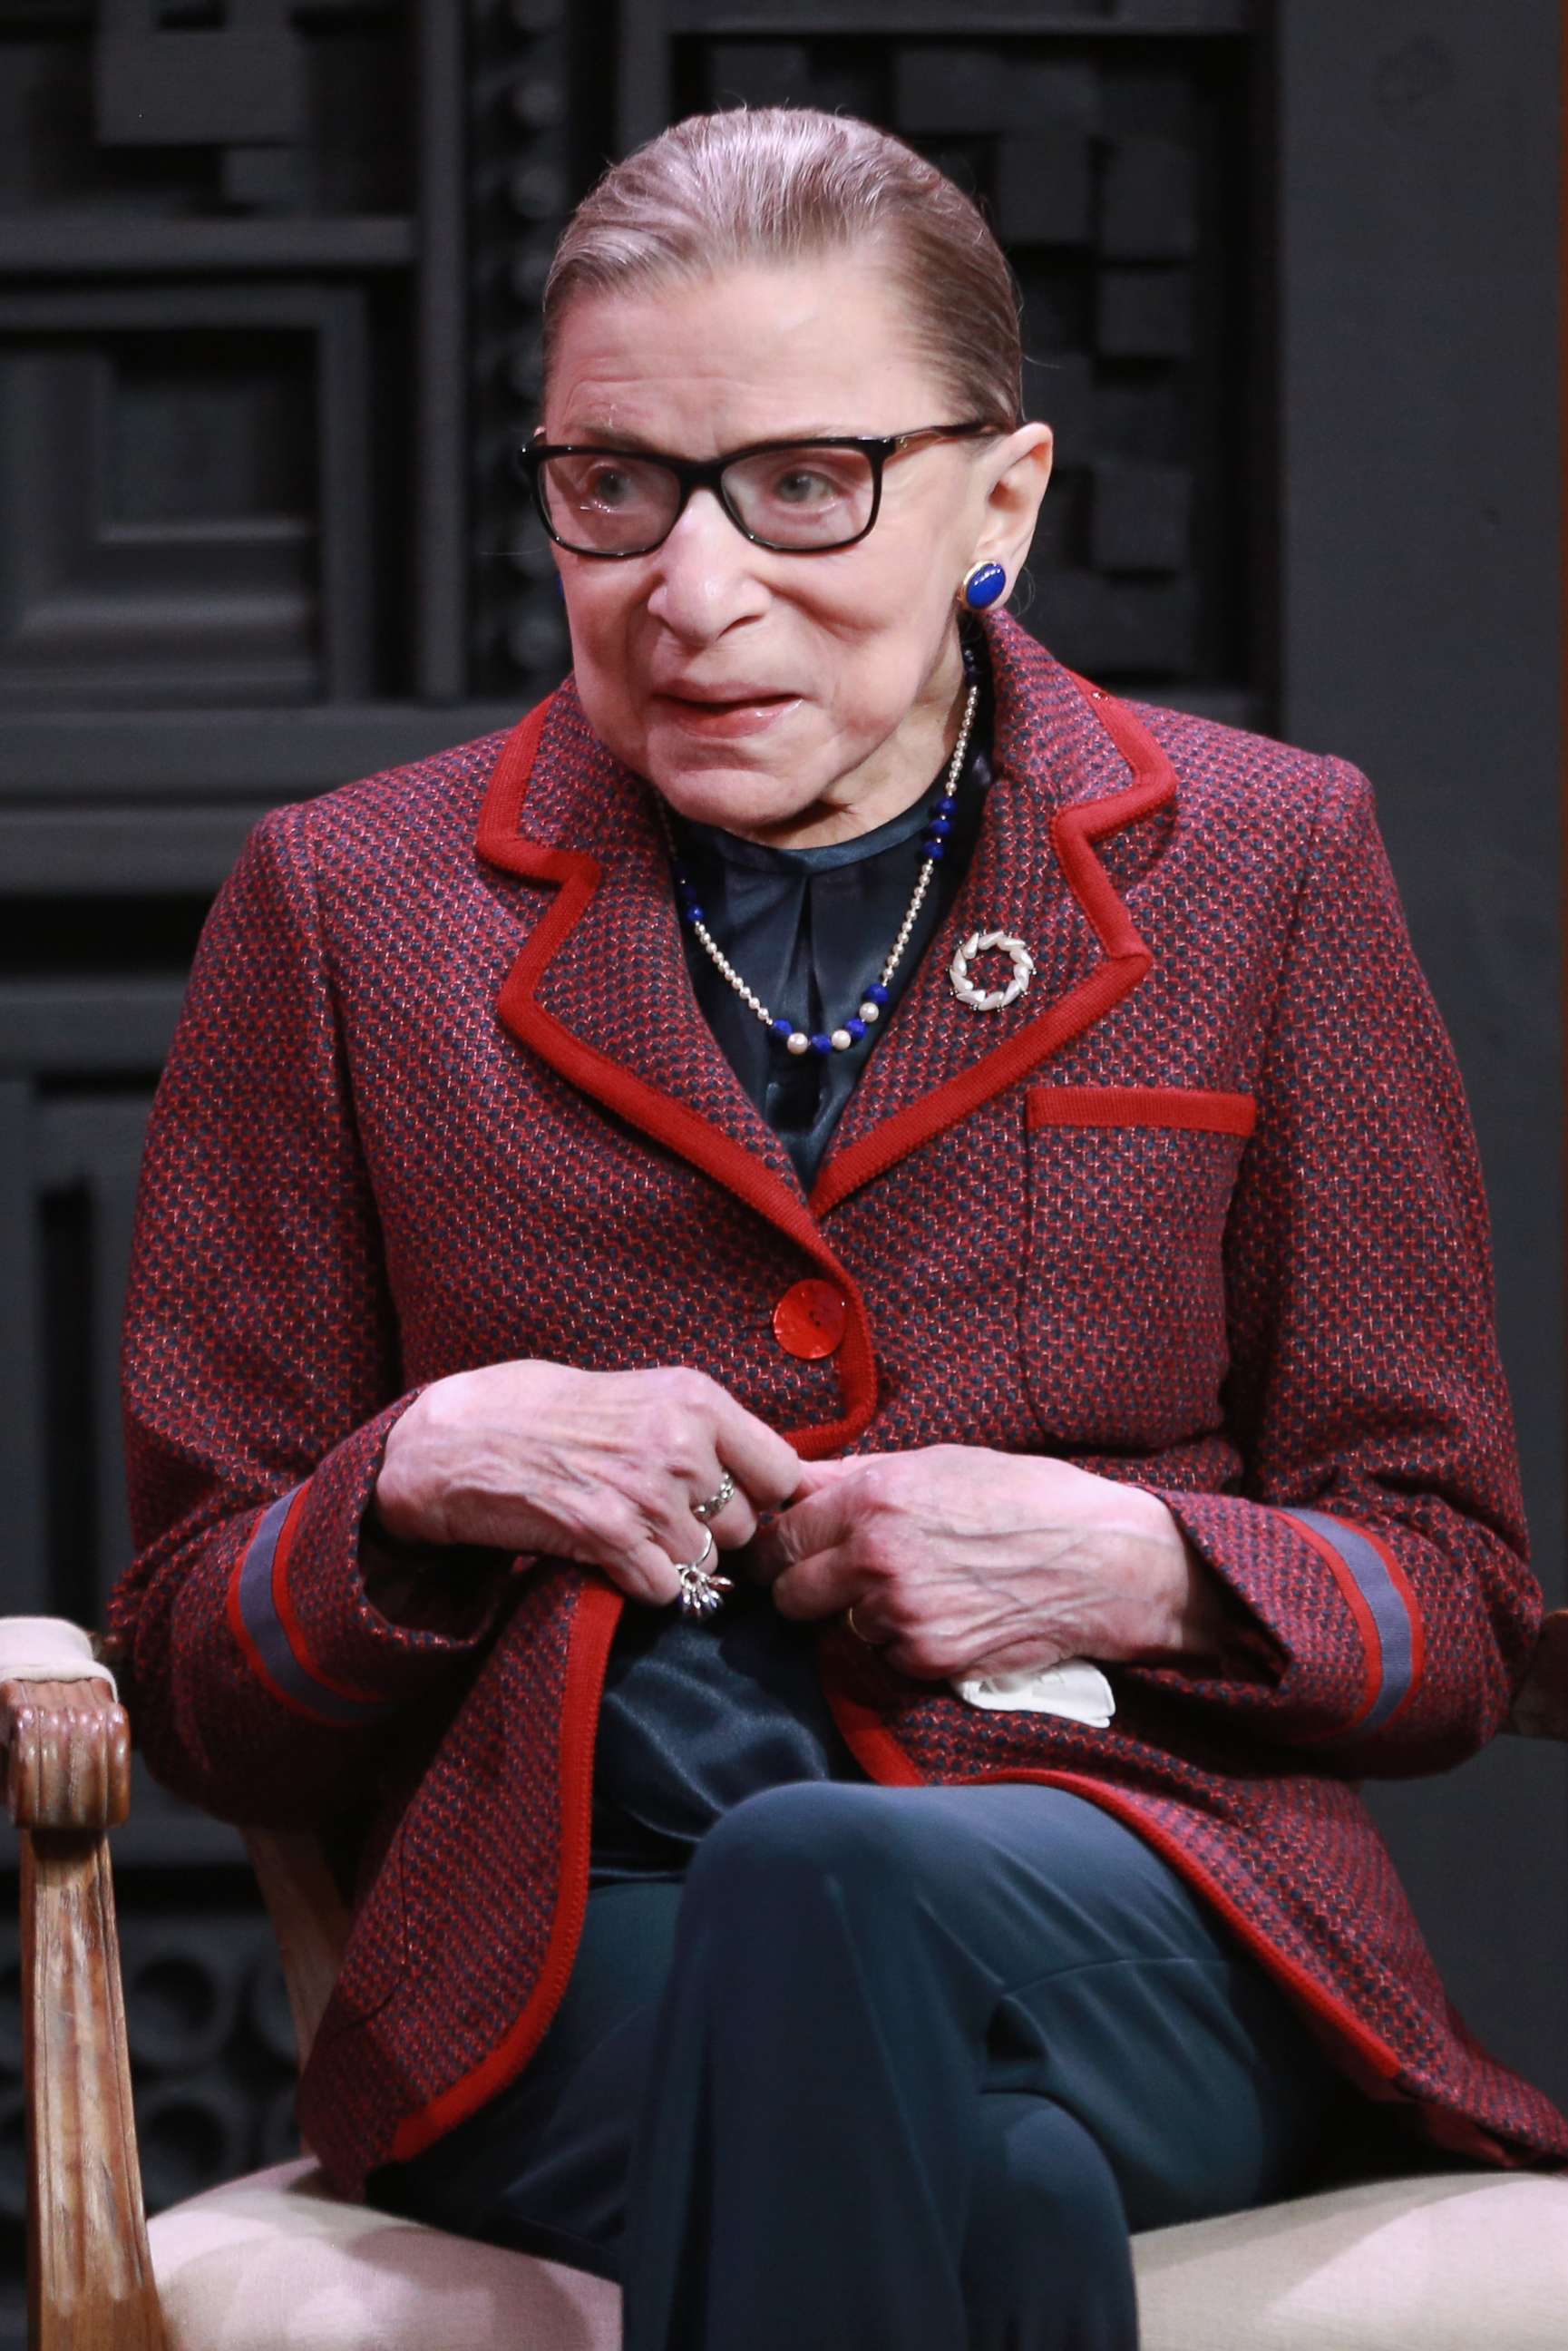 PHOTO: Supreme Court Justice Ruth Bader Ginsburg speaks at an event during the 2018 Sundance Film Festival in Park City, Utah, Jan. 21, 2018.